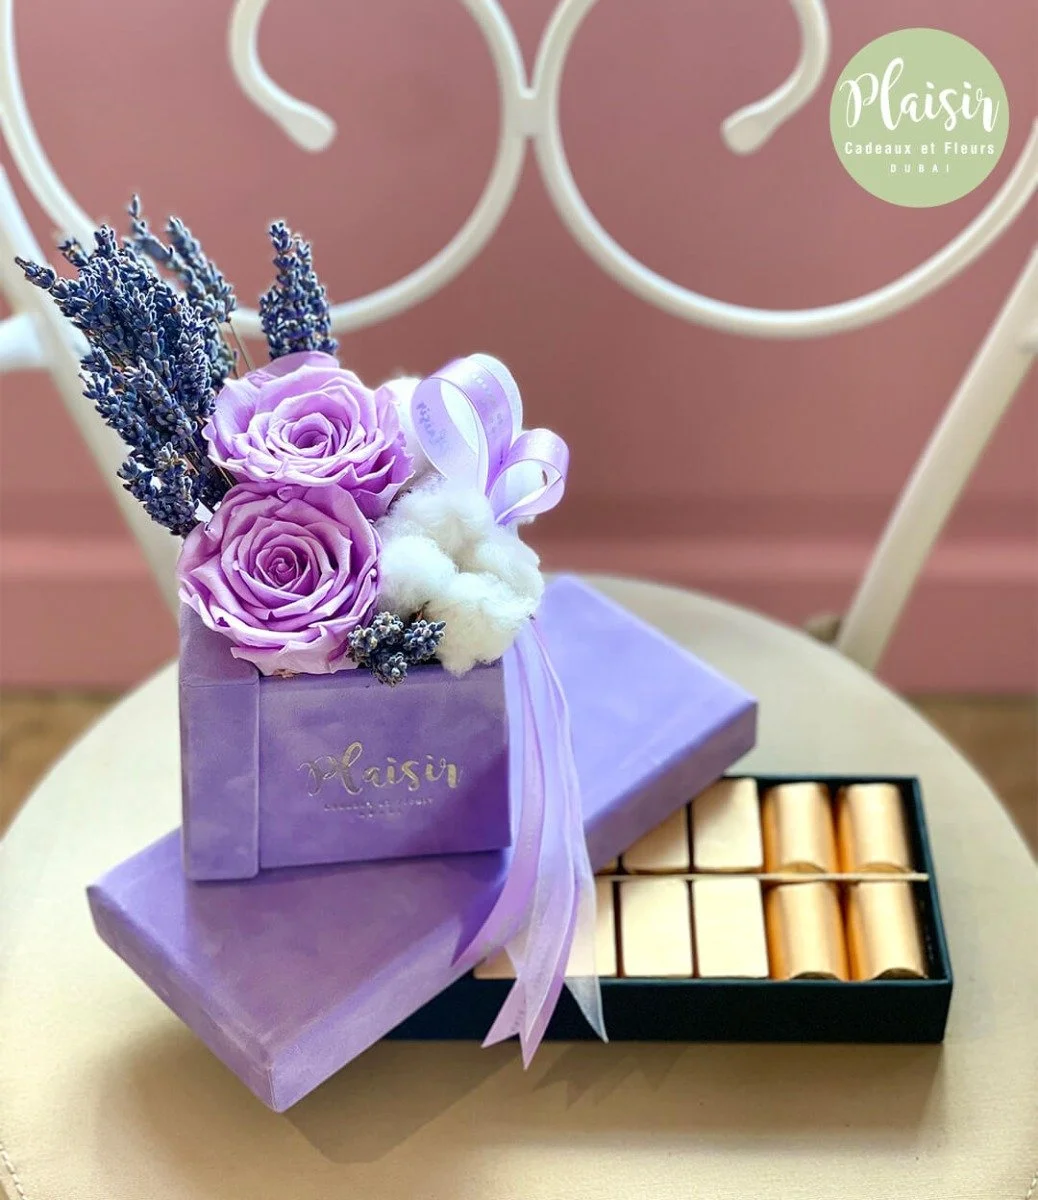 Double Infinity Rose and Patchi Chocolate Giftset in Lilac by Plaisir